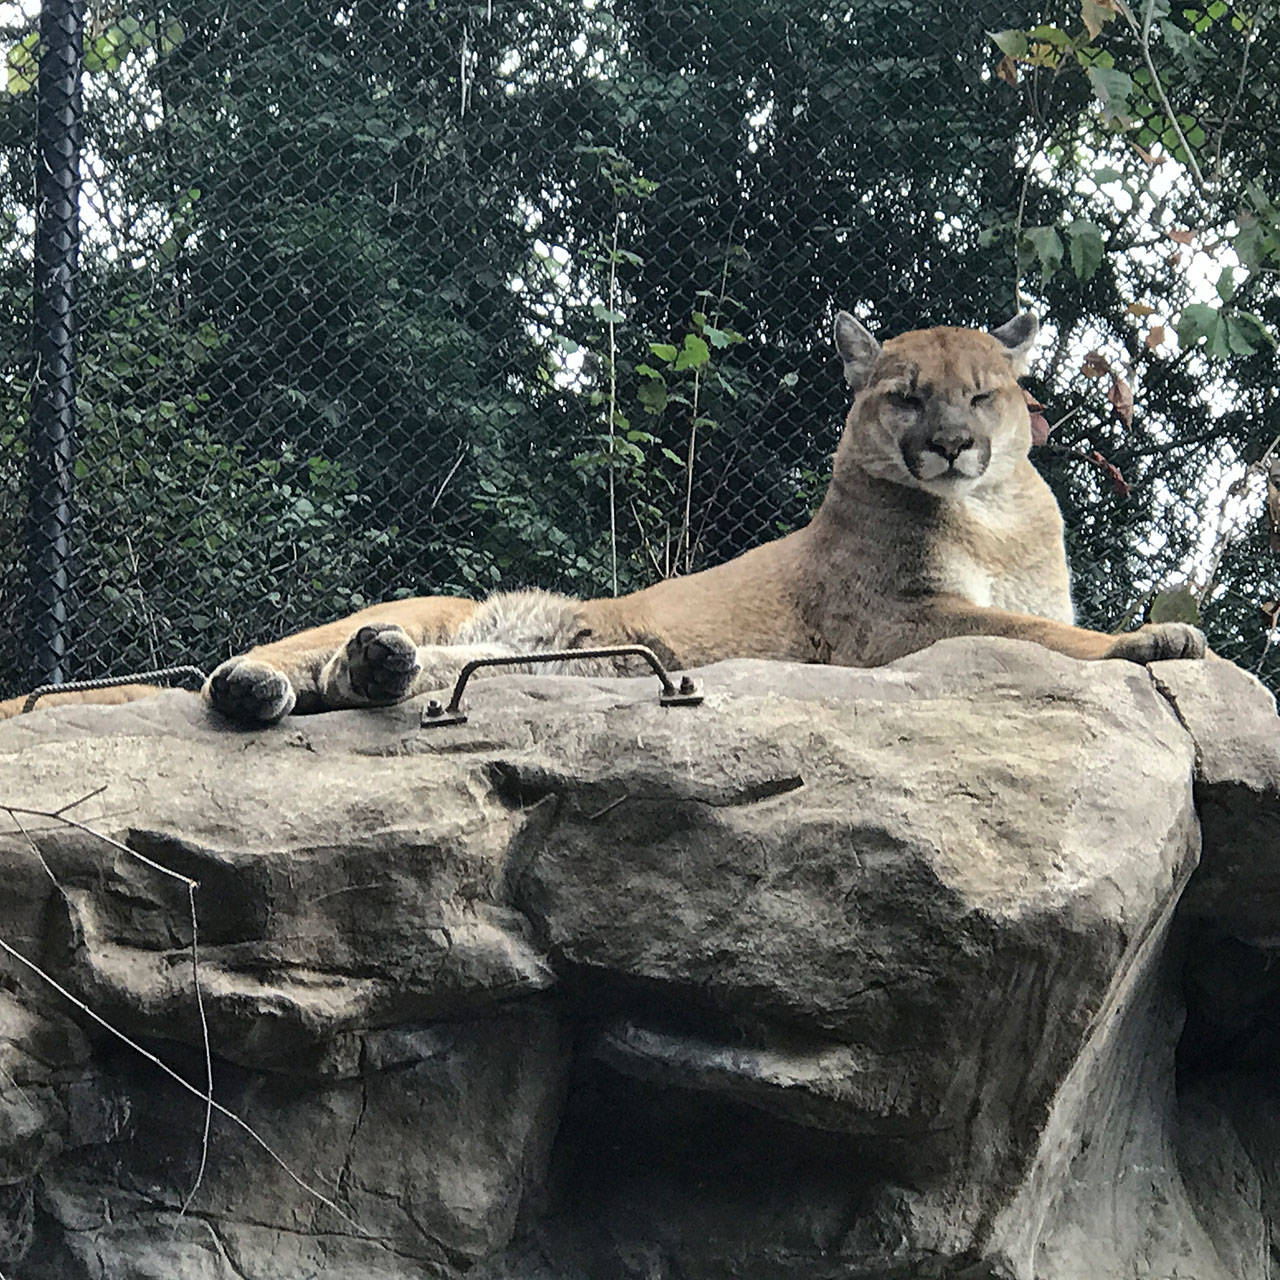 Sequim, a cougar rescued from Joyce, is looking healthy and beautiful in the Minnesota Zoo, says Sequim resident Arline Dailey. She made a special trip during a family visit to see the cougar who was rescued in October 2016. Photo courtesy of Arline Dailey